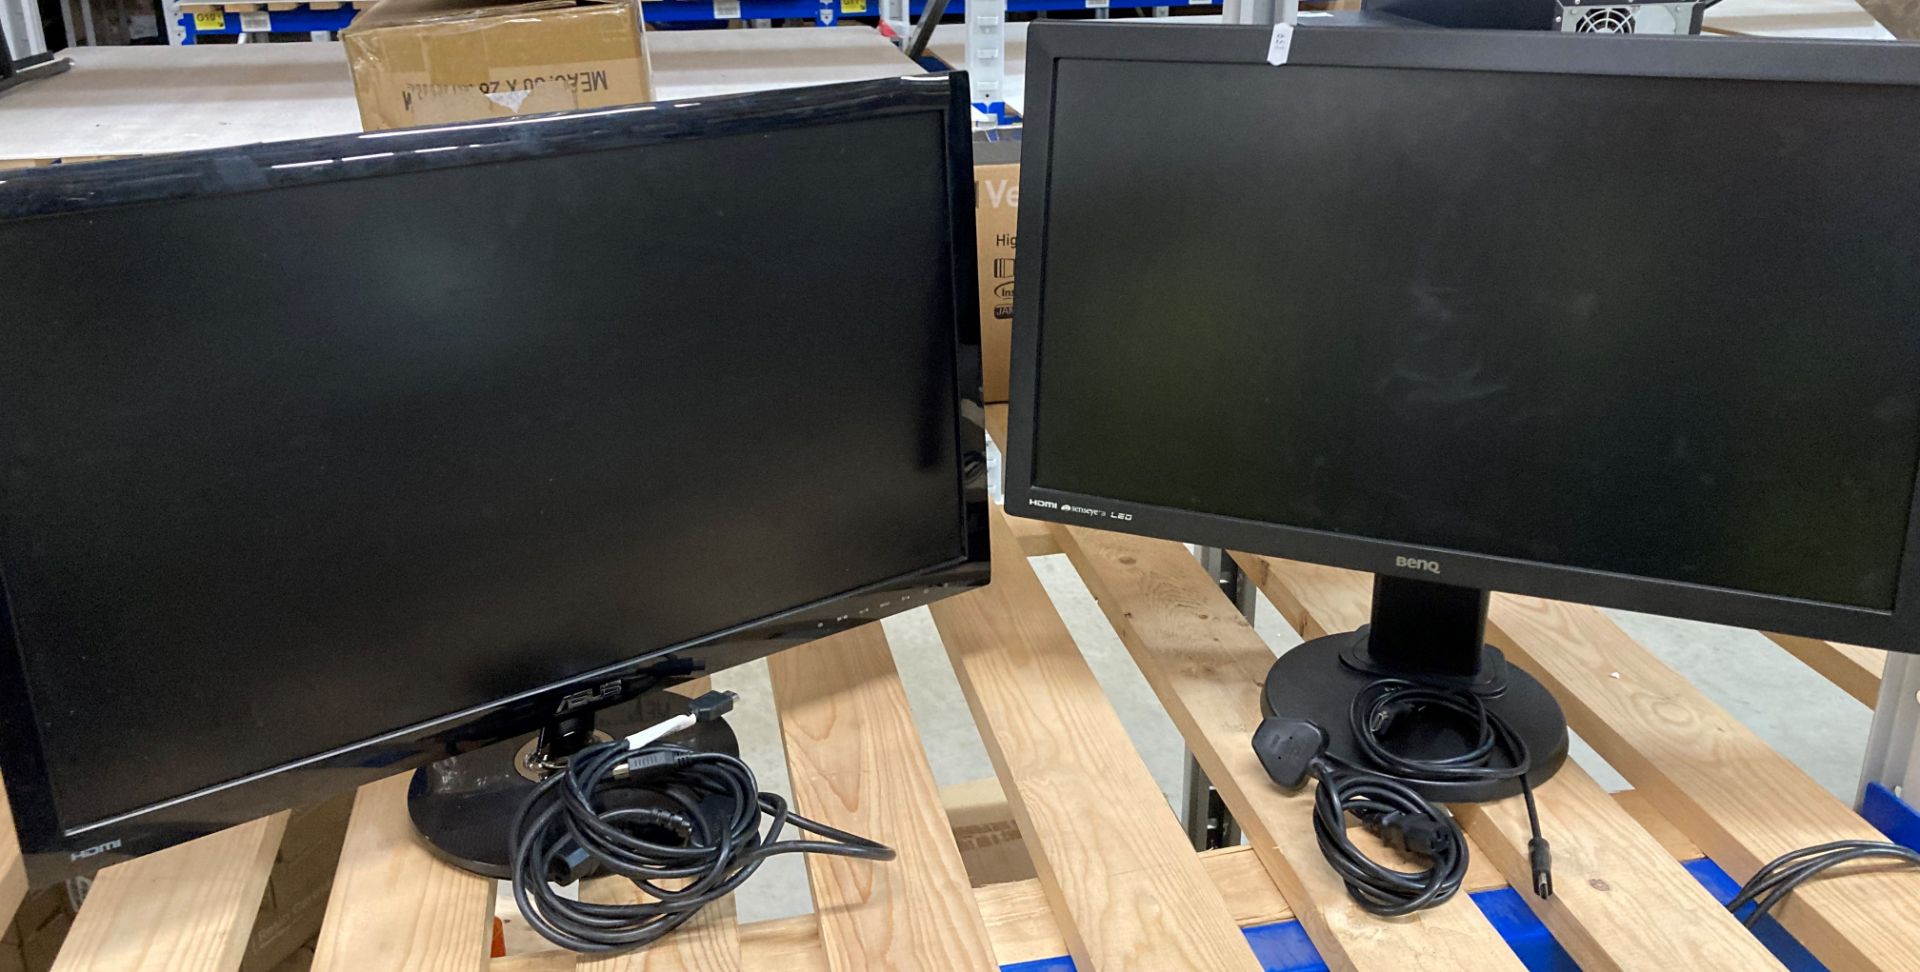 2 x HDMI computer monitors by Benq Senseye BL2405 and Asus - complete with power lead and HDMI